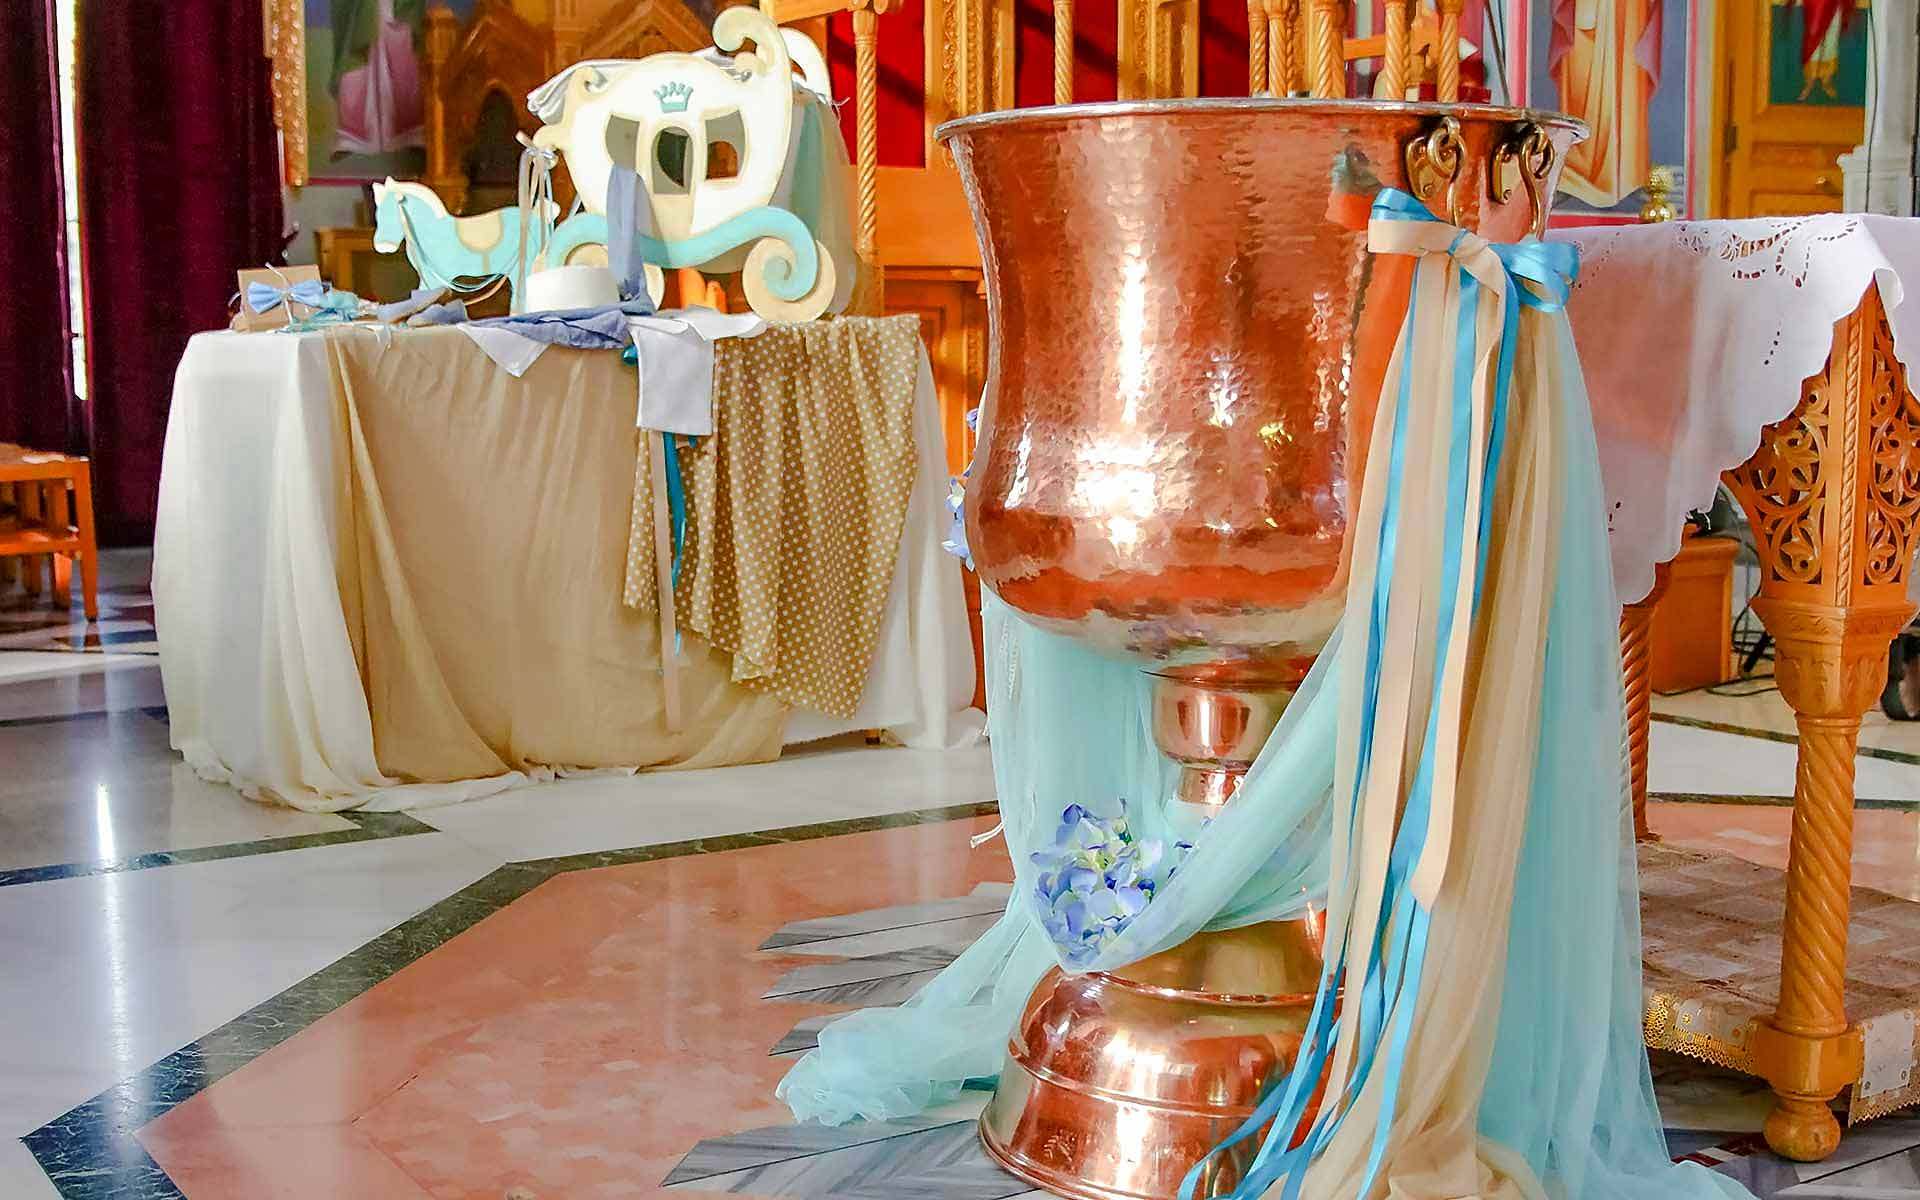 Turquoise-Fabrics-And-Ribbons-And-Blue-Hydrangeas-Are-Uniquely-Combined-To-Decorate-A-Rose-Gold-Baptistery